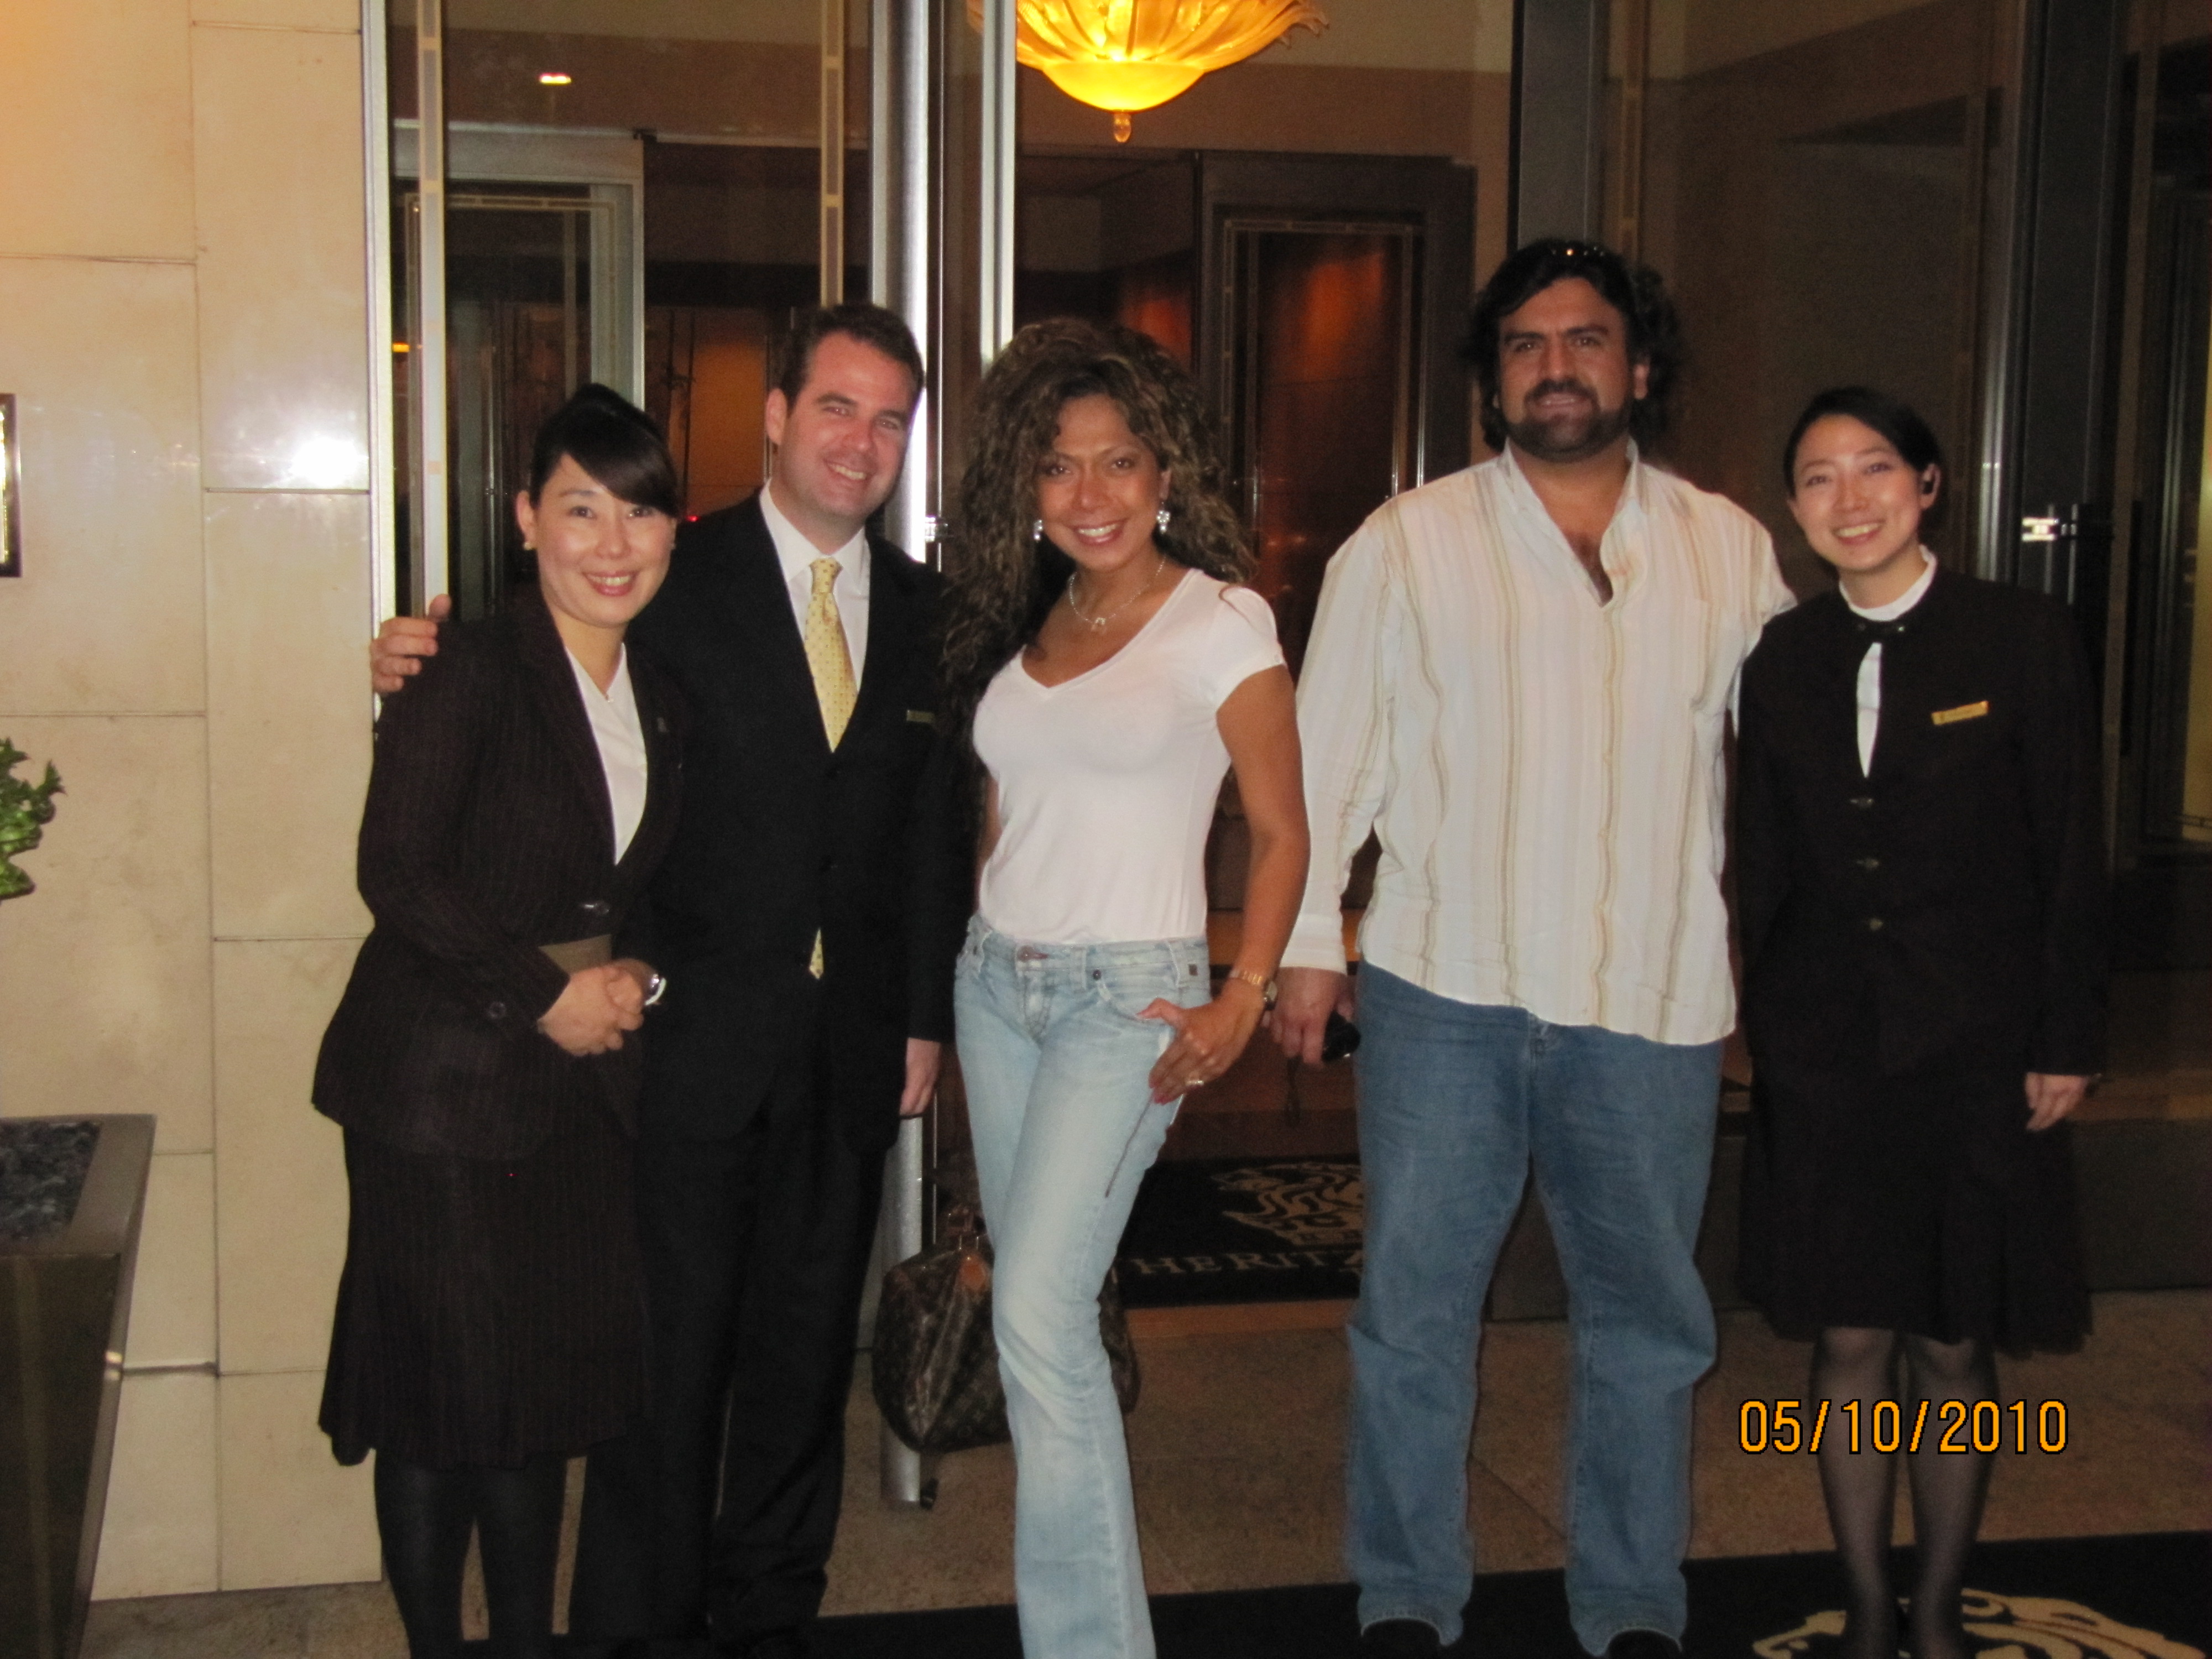 The staff and Manager at The Ritz Carlton, Tokyo